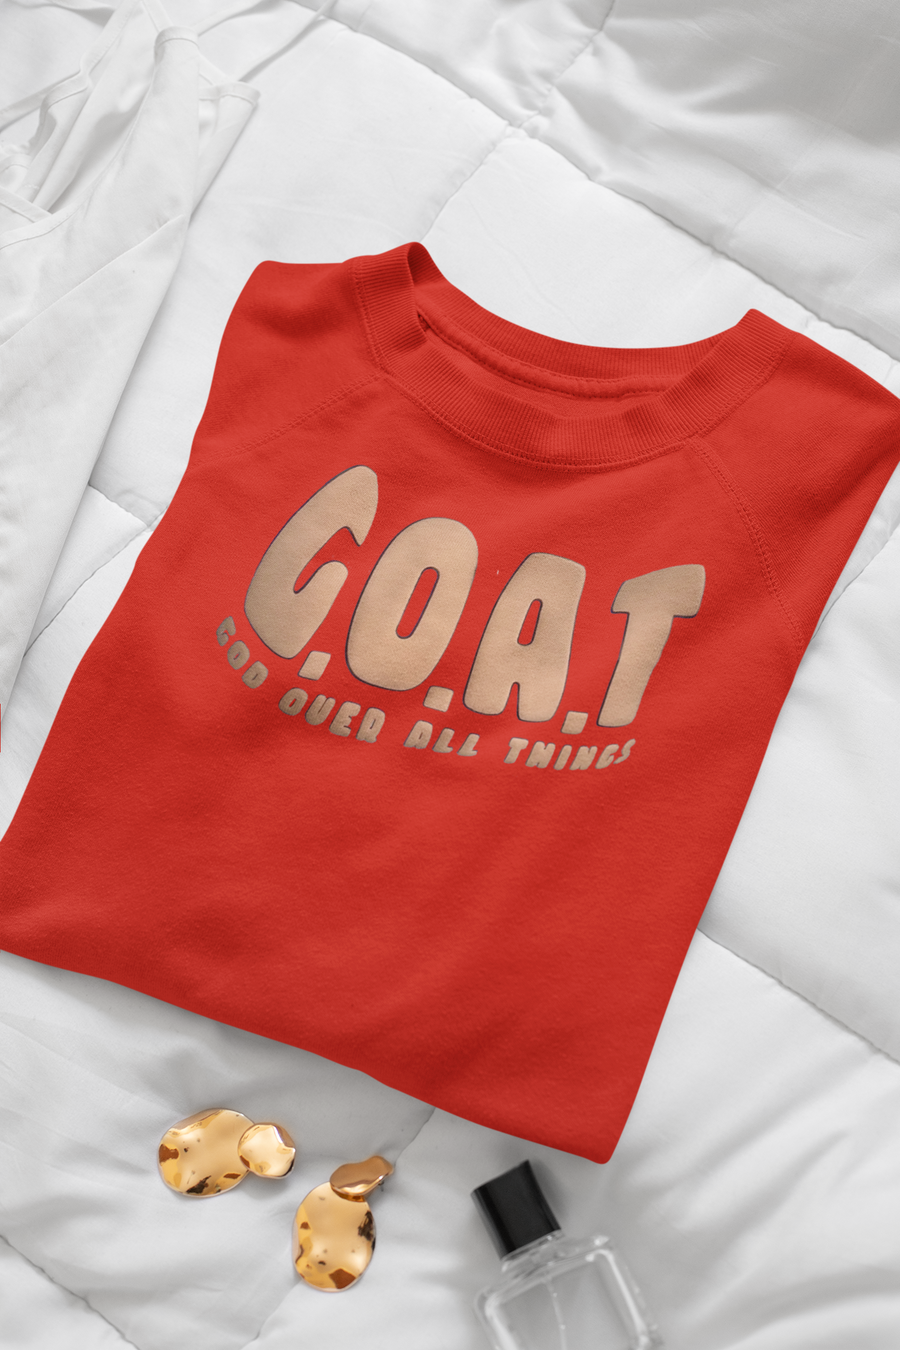 G.O.A.T - God over all things Sweater tan Puff